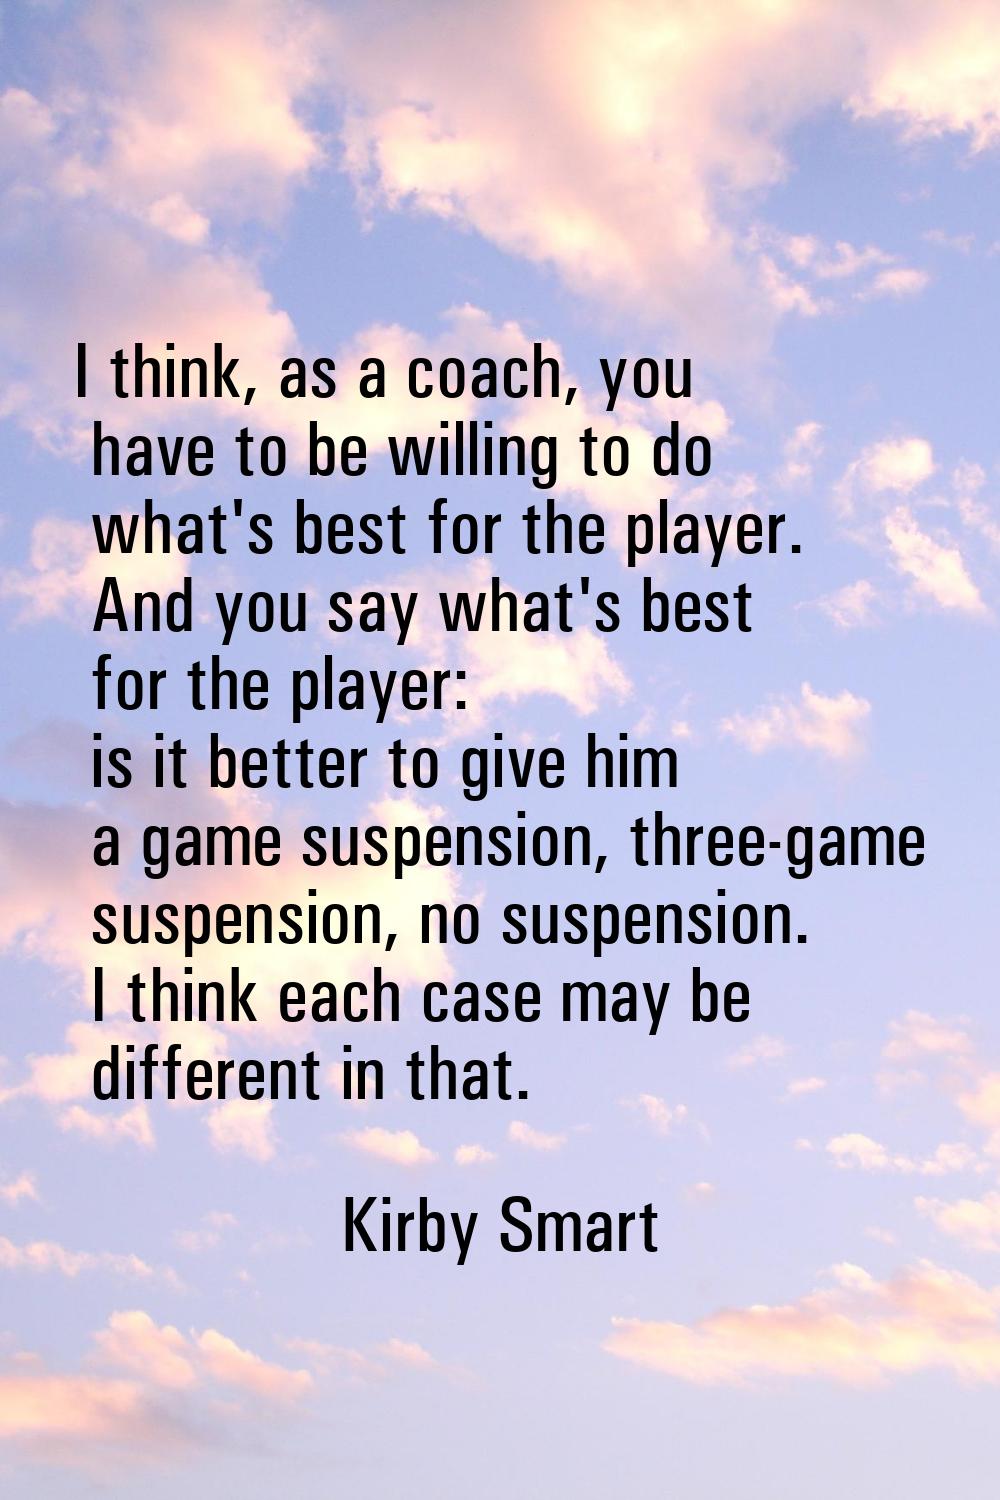 I think, as a coach, you have to be willing to do what's best for the player. And you say what's be